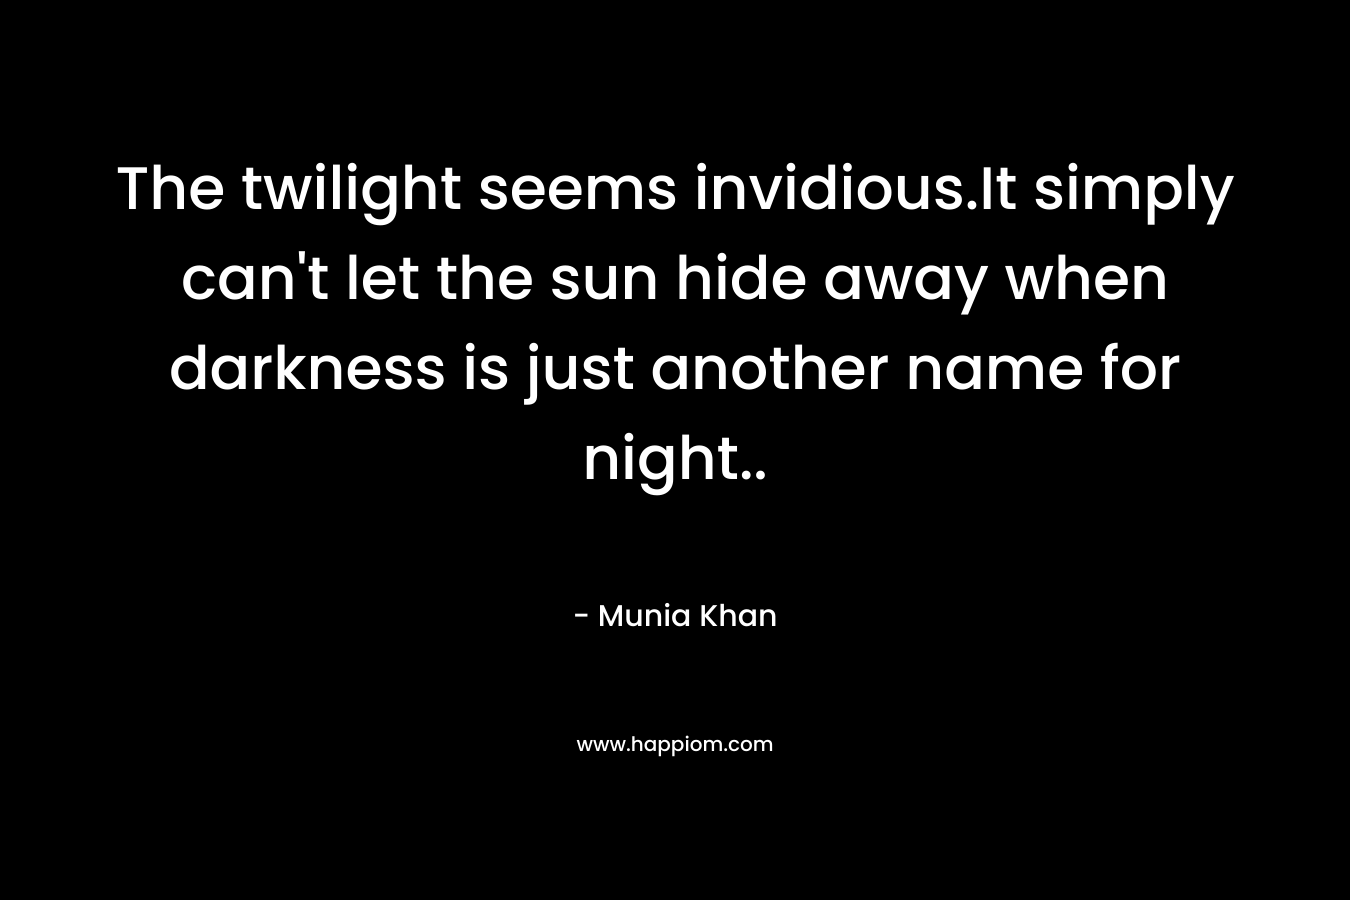 The twilight seems invidious.It simply can’t let the sun hide away when darkness is just another name for night.. – Munia Khan